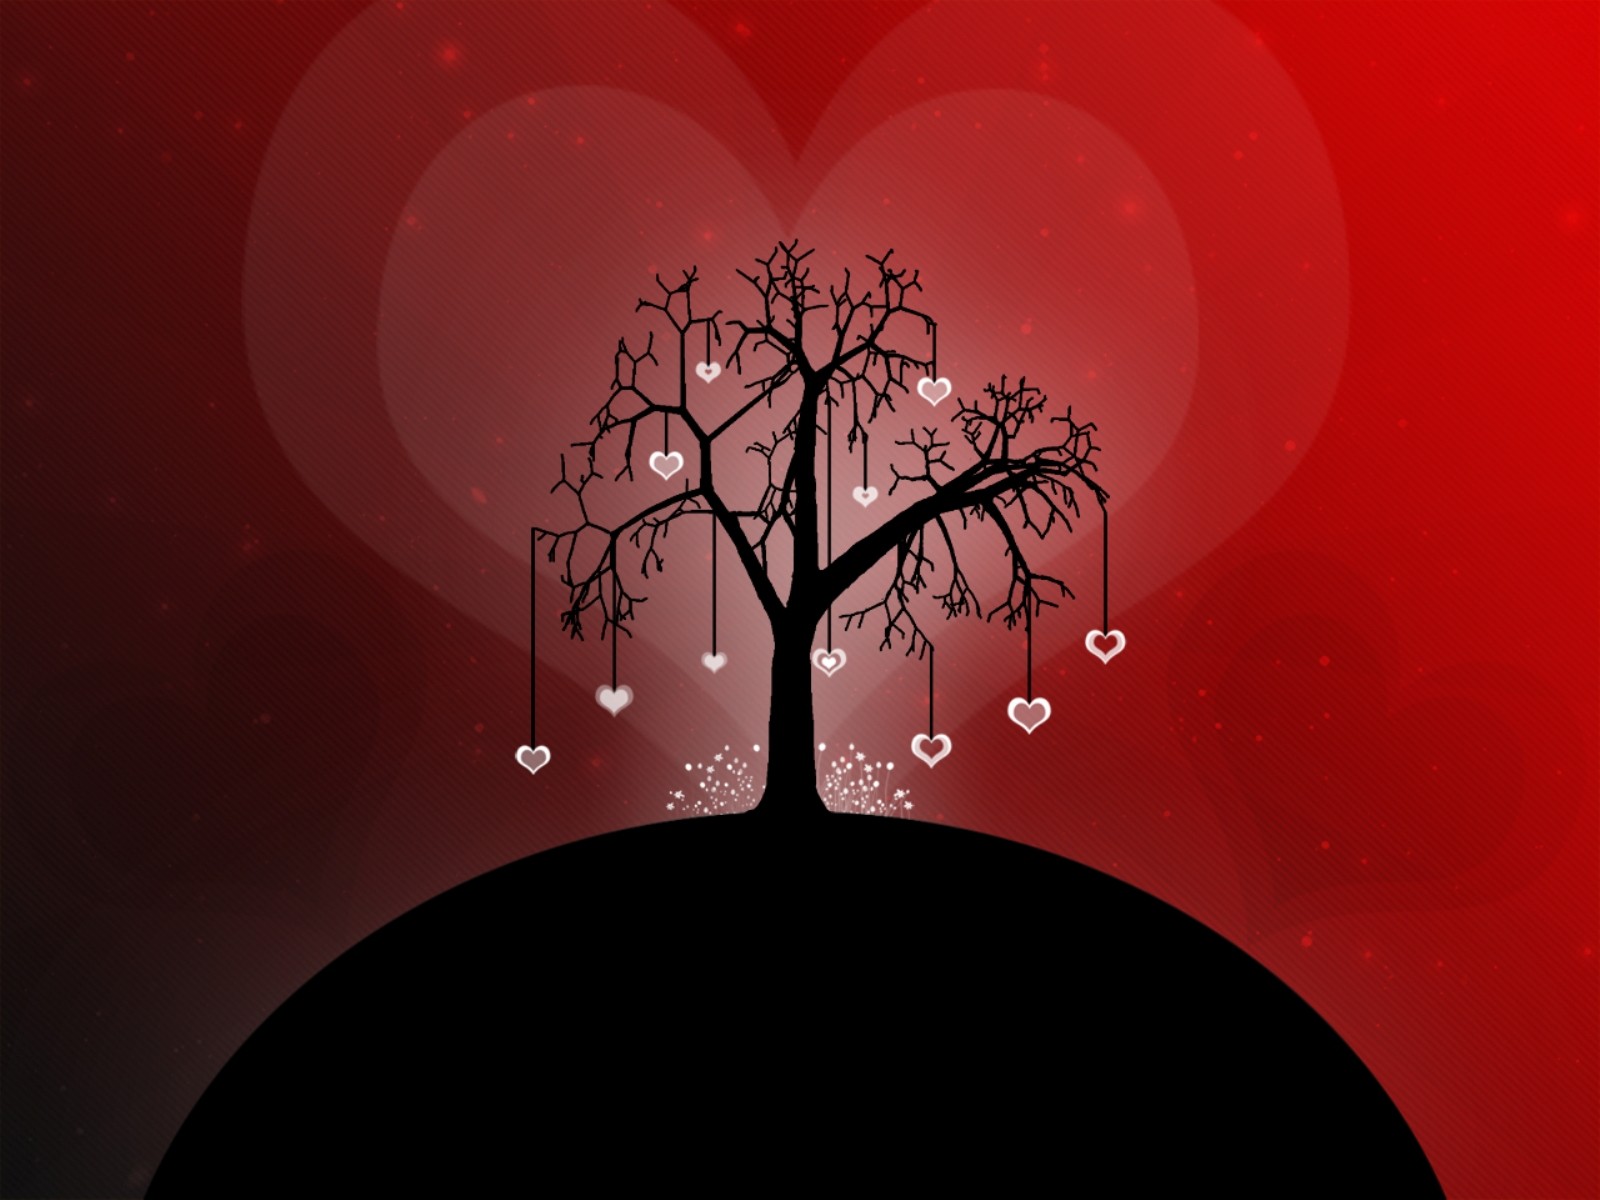 General 1600x1200 trees heart love red black